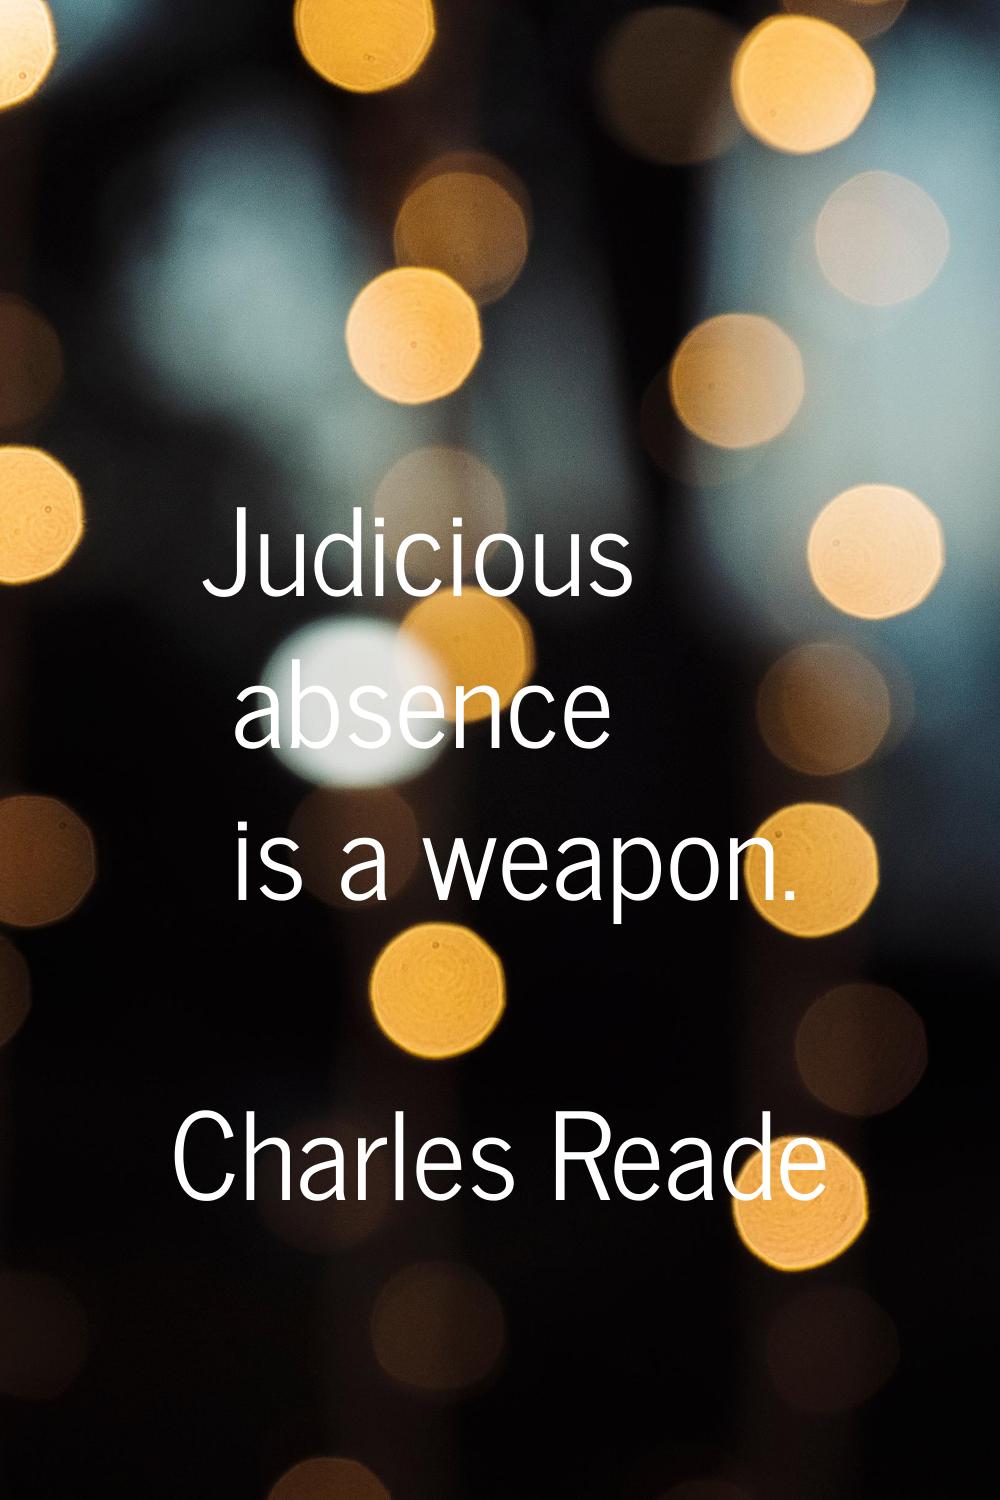 Judicious absence is a weapon.